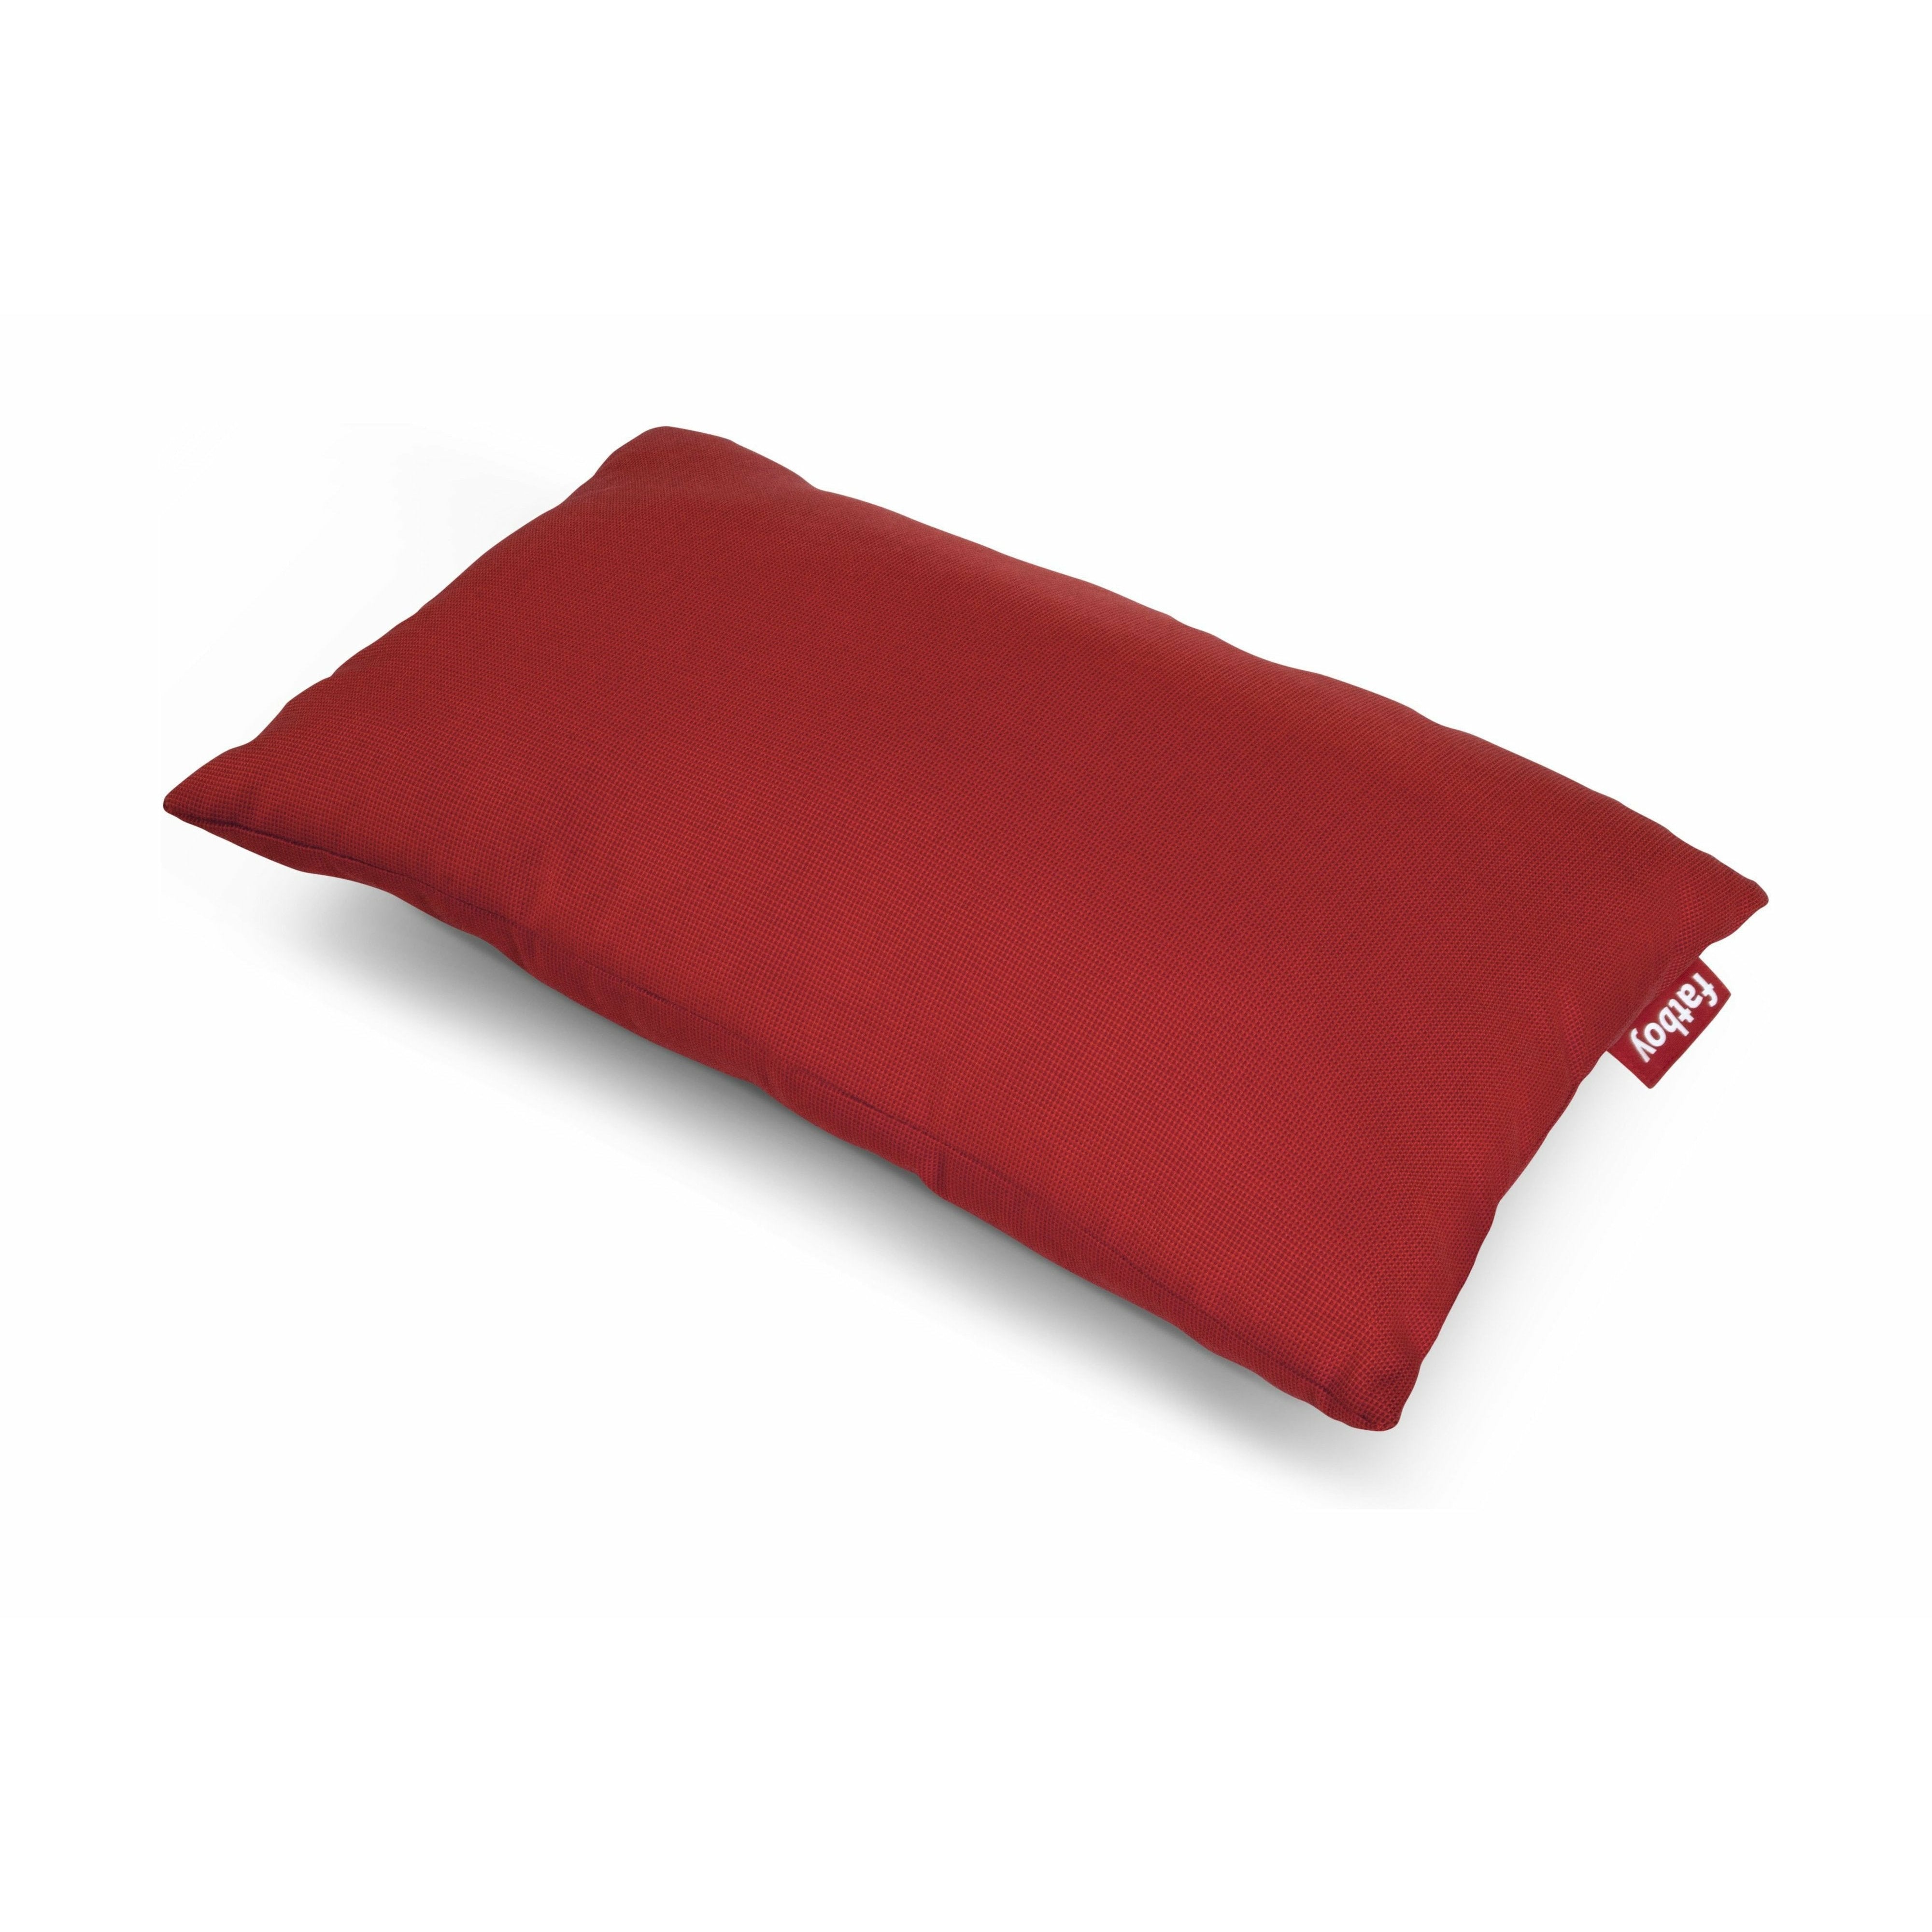 Fatboy Pillow King Outdoor, Red